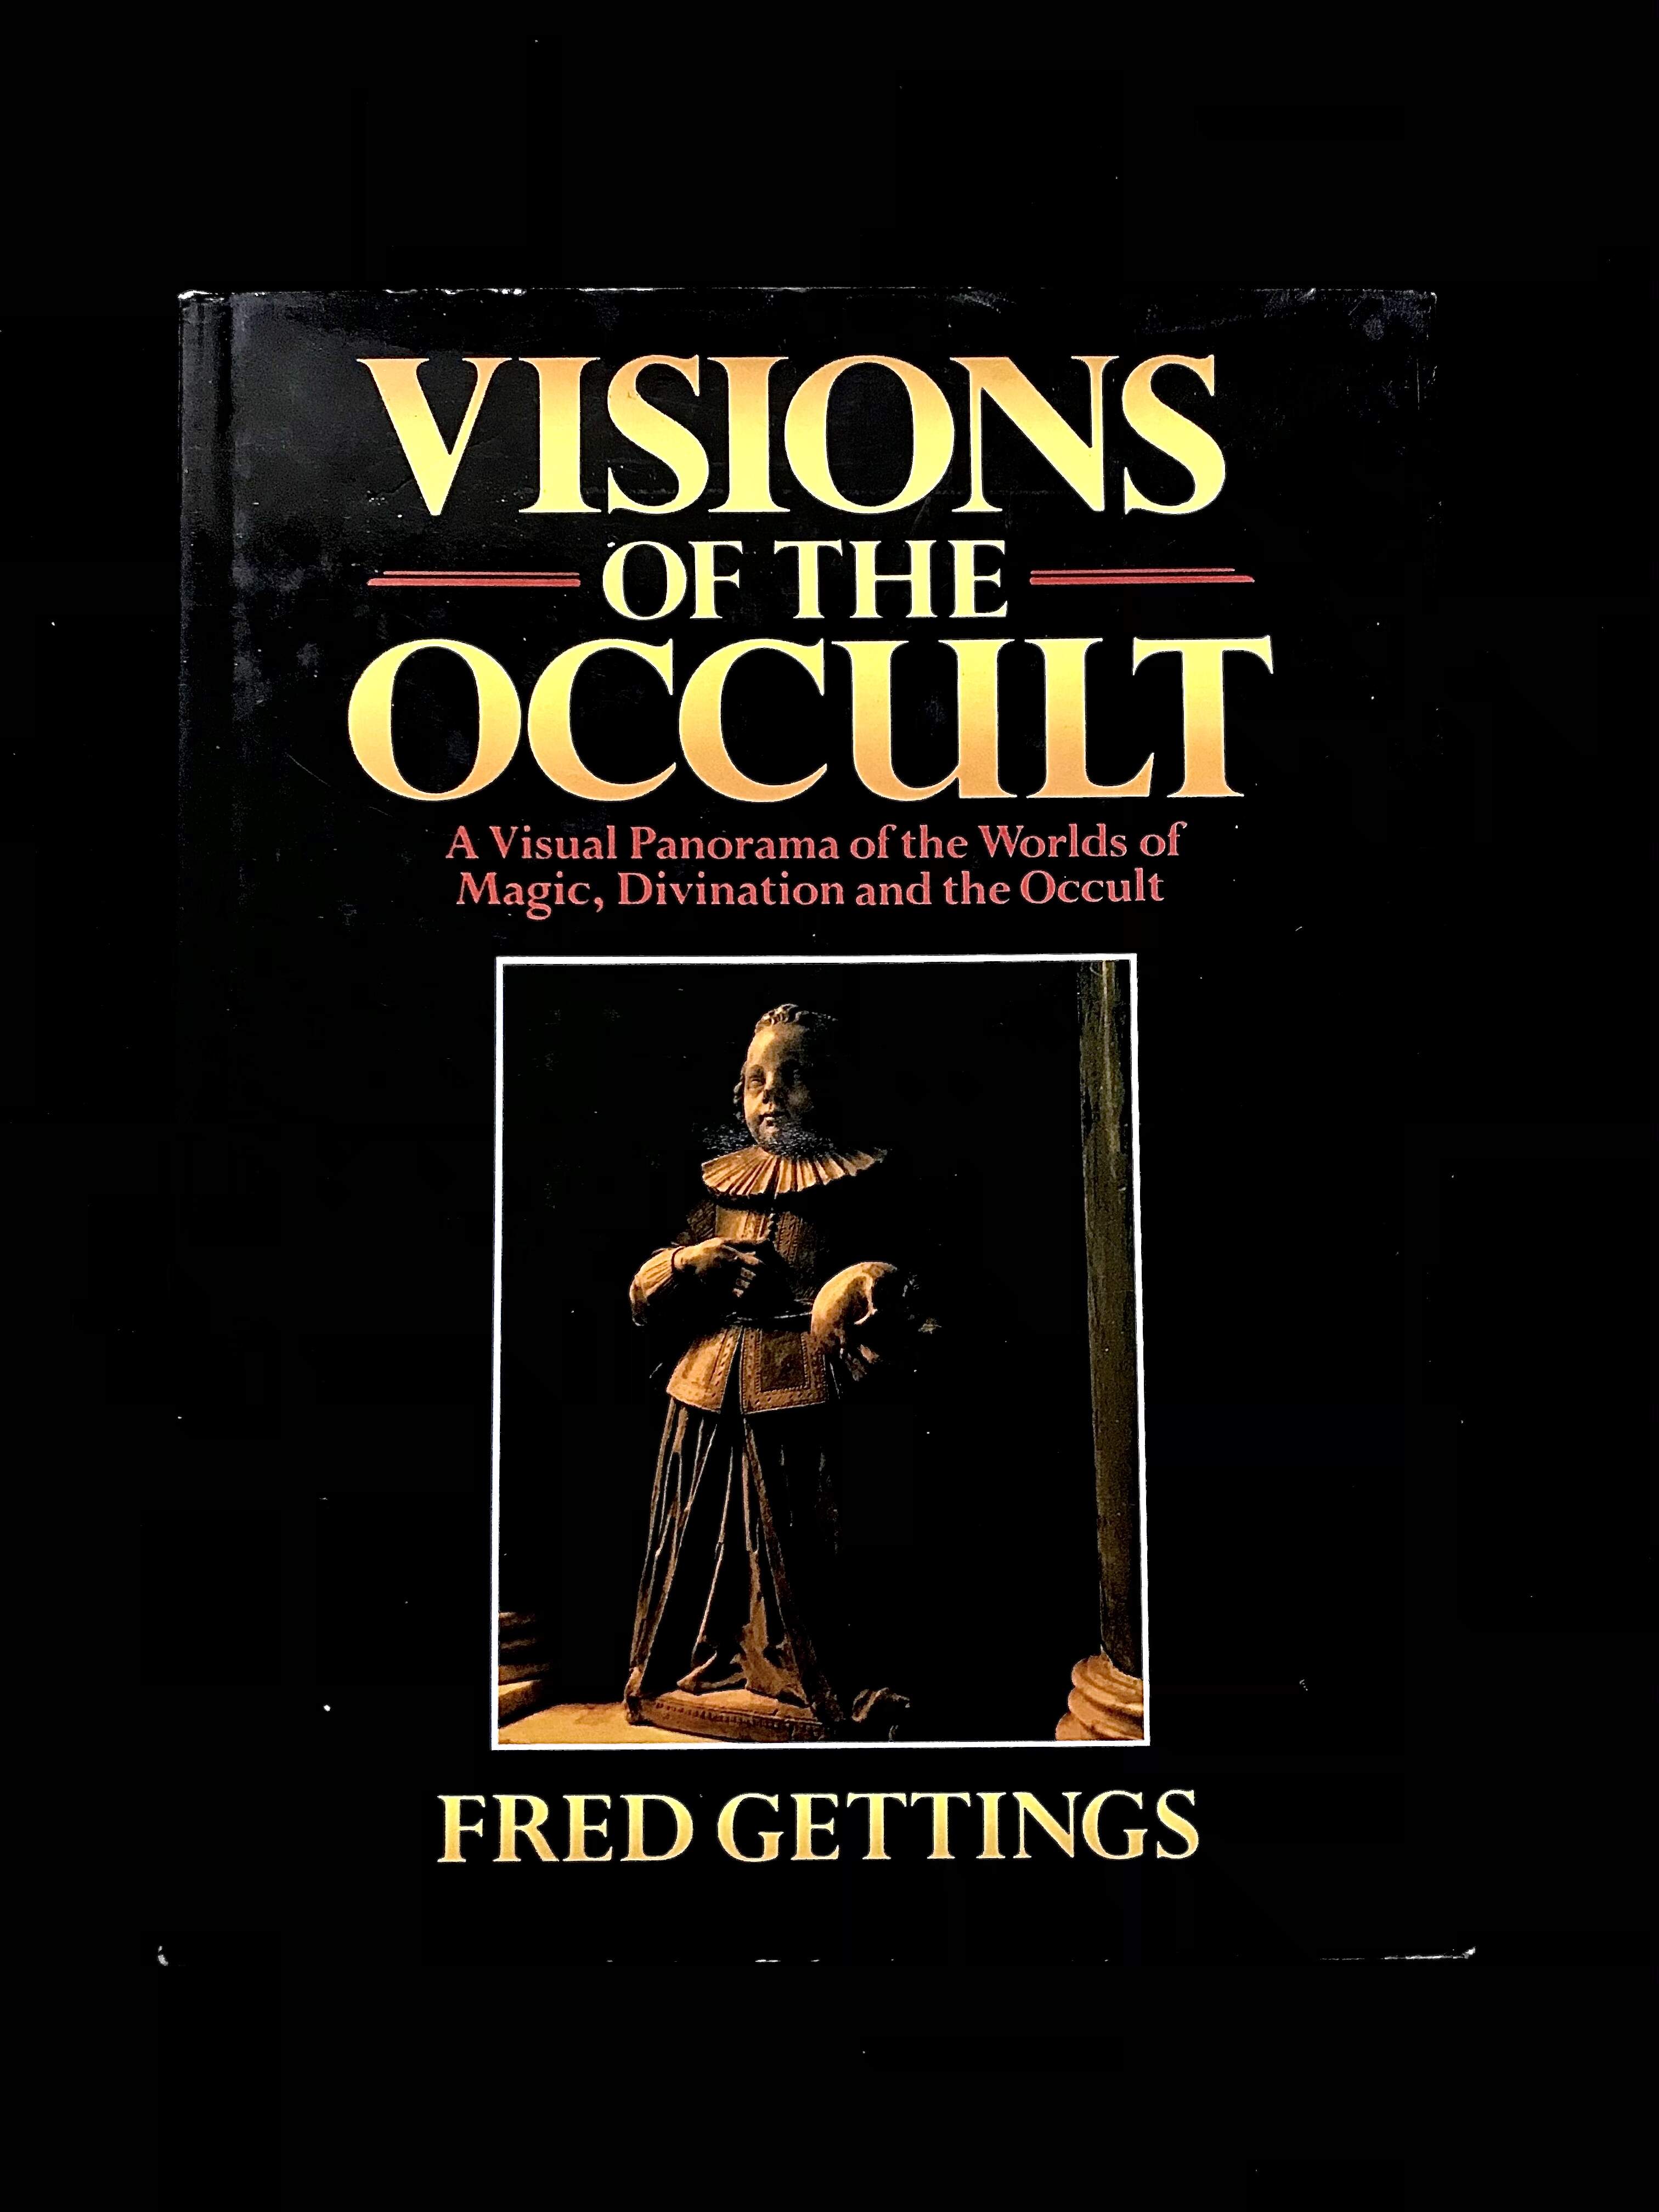 Visions of the Occult by Fred Gettings